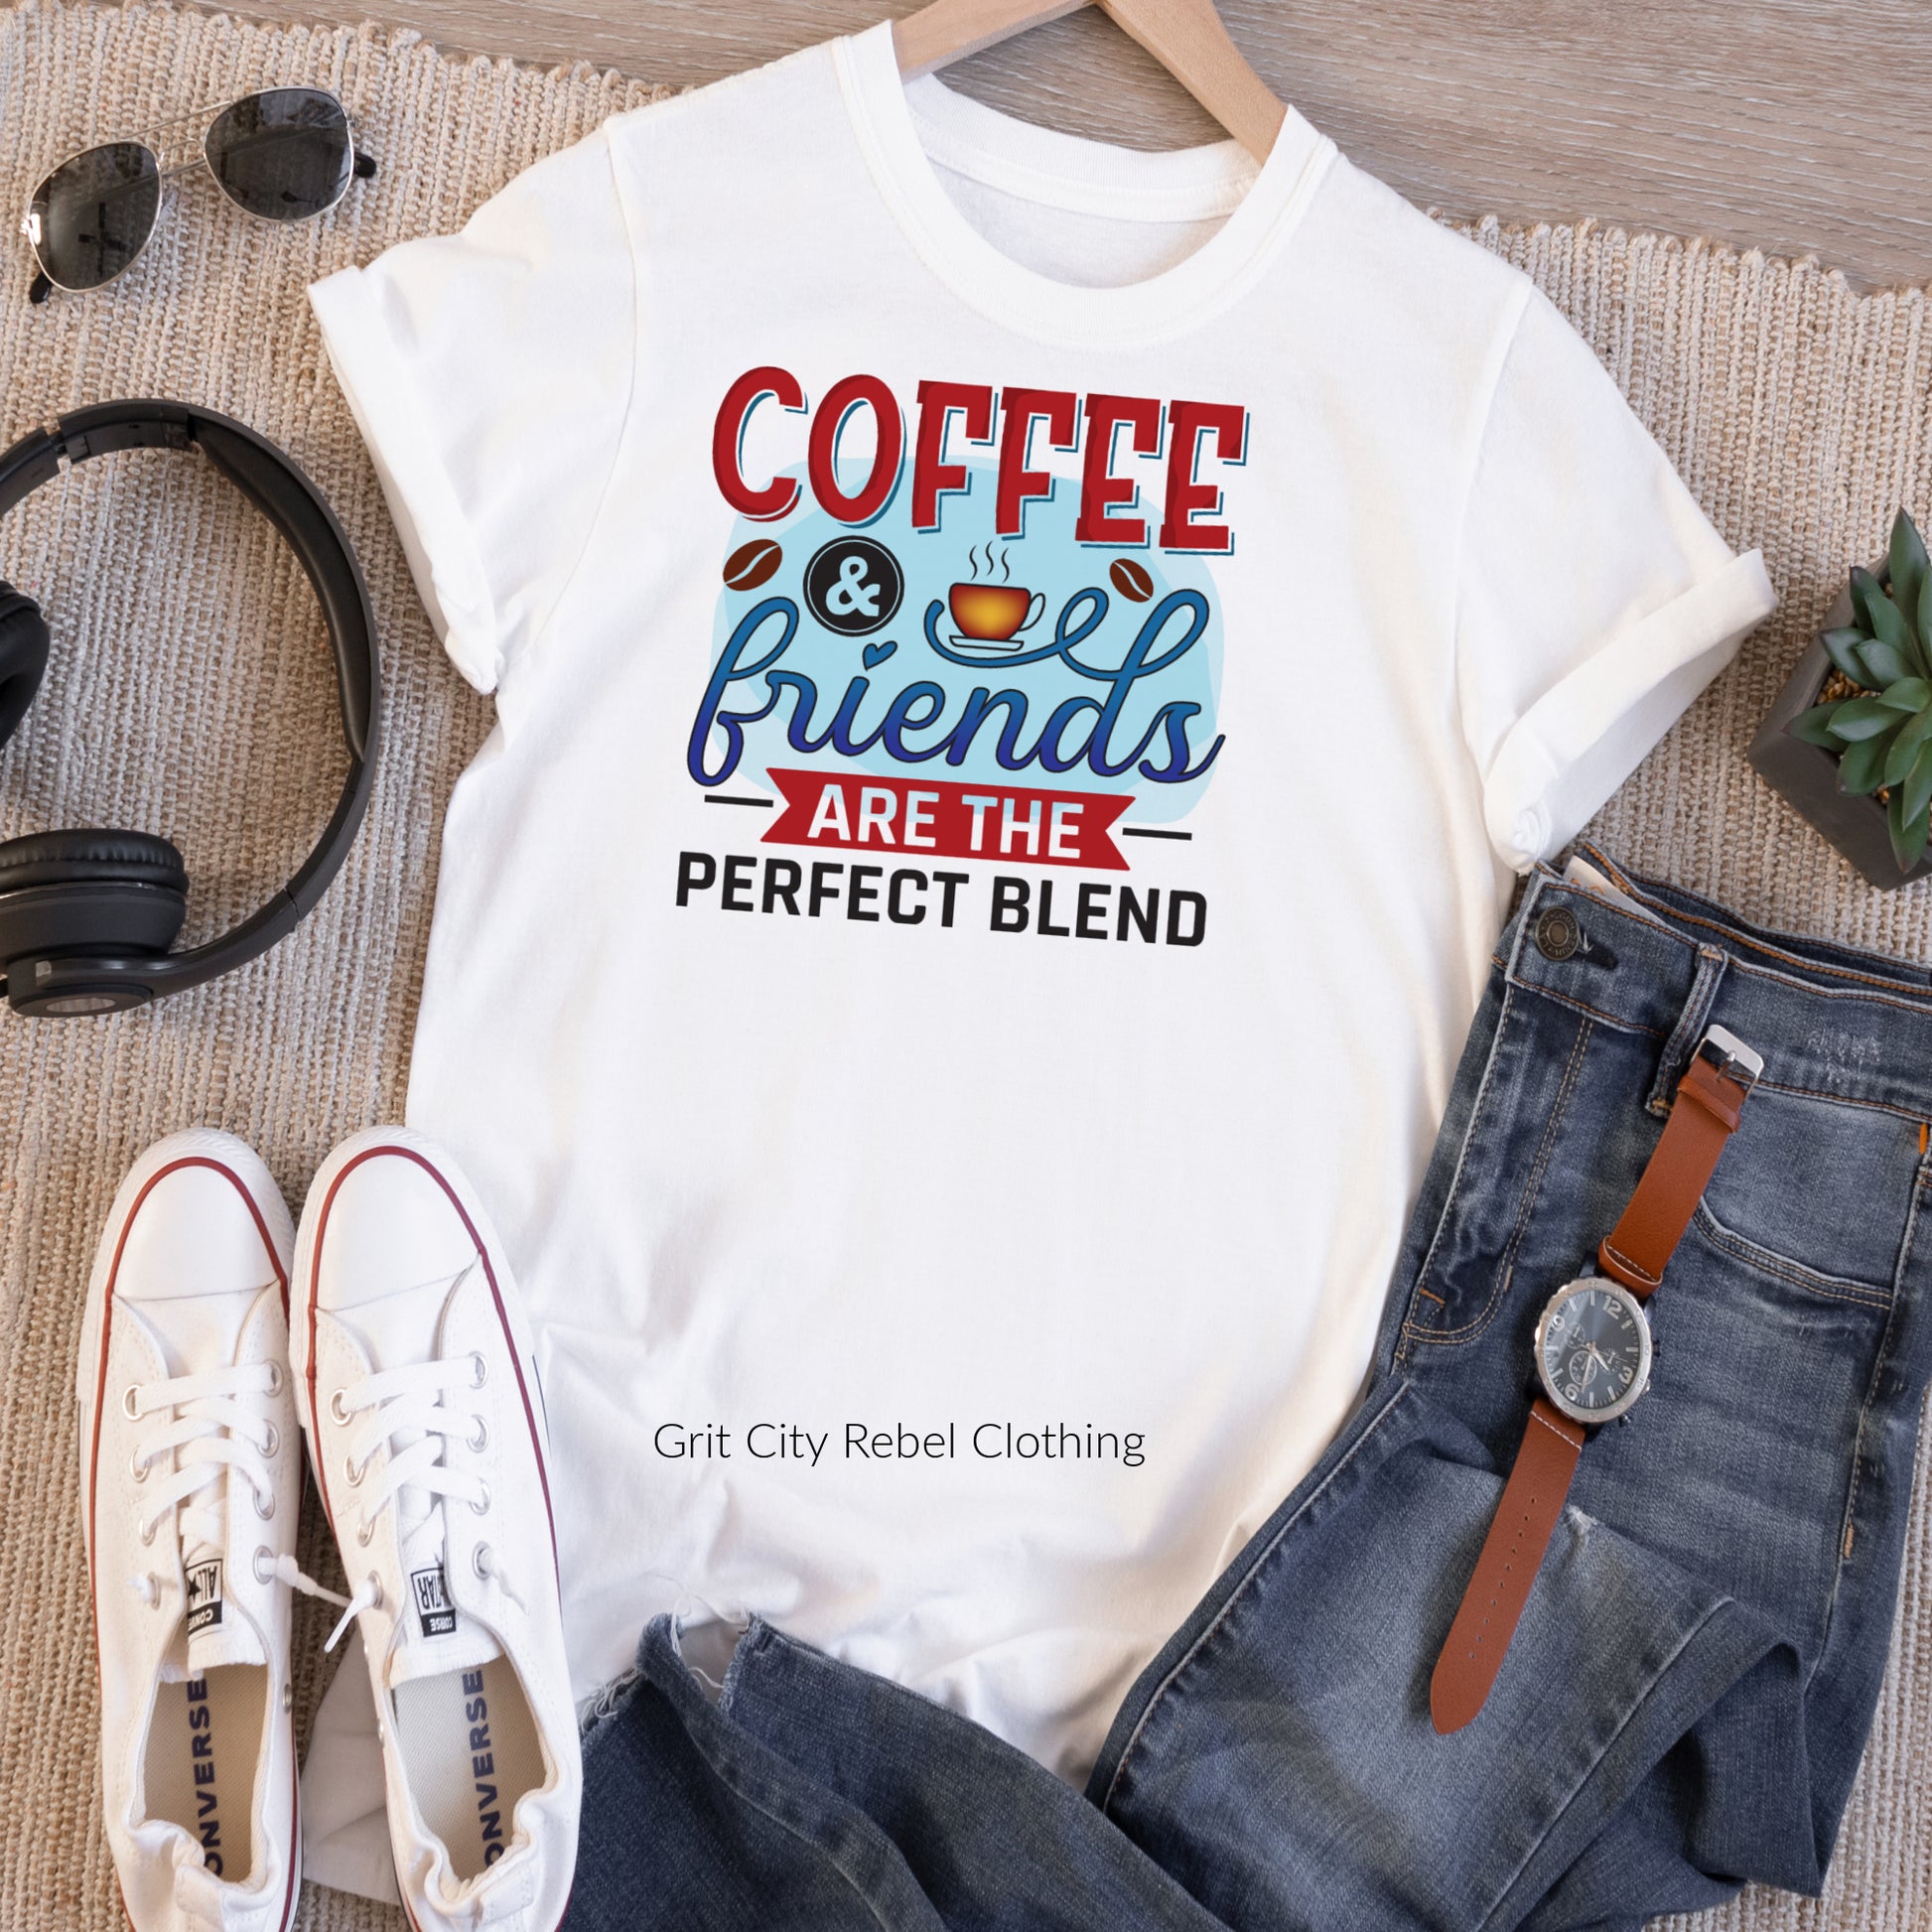 White short sleeve Tshirt with the saying in blue, red and black of Coffee & friends Are The Perfect Blend